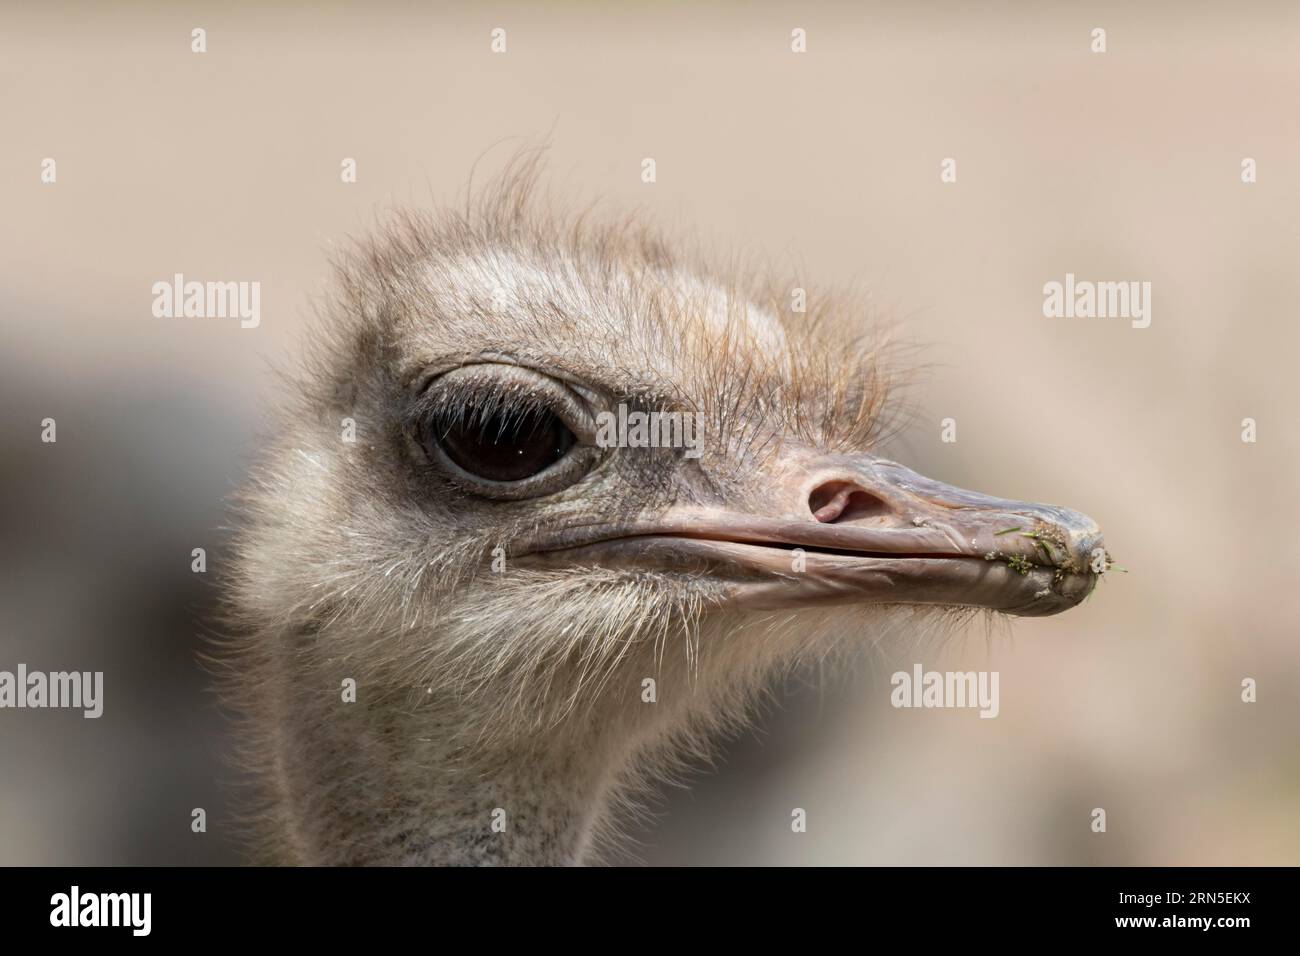 South African ostrich (Struthio camelus australis), animal portrait, captive, Germany Stock Photo